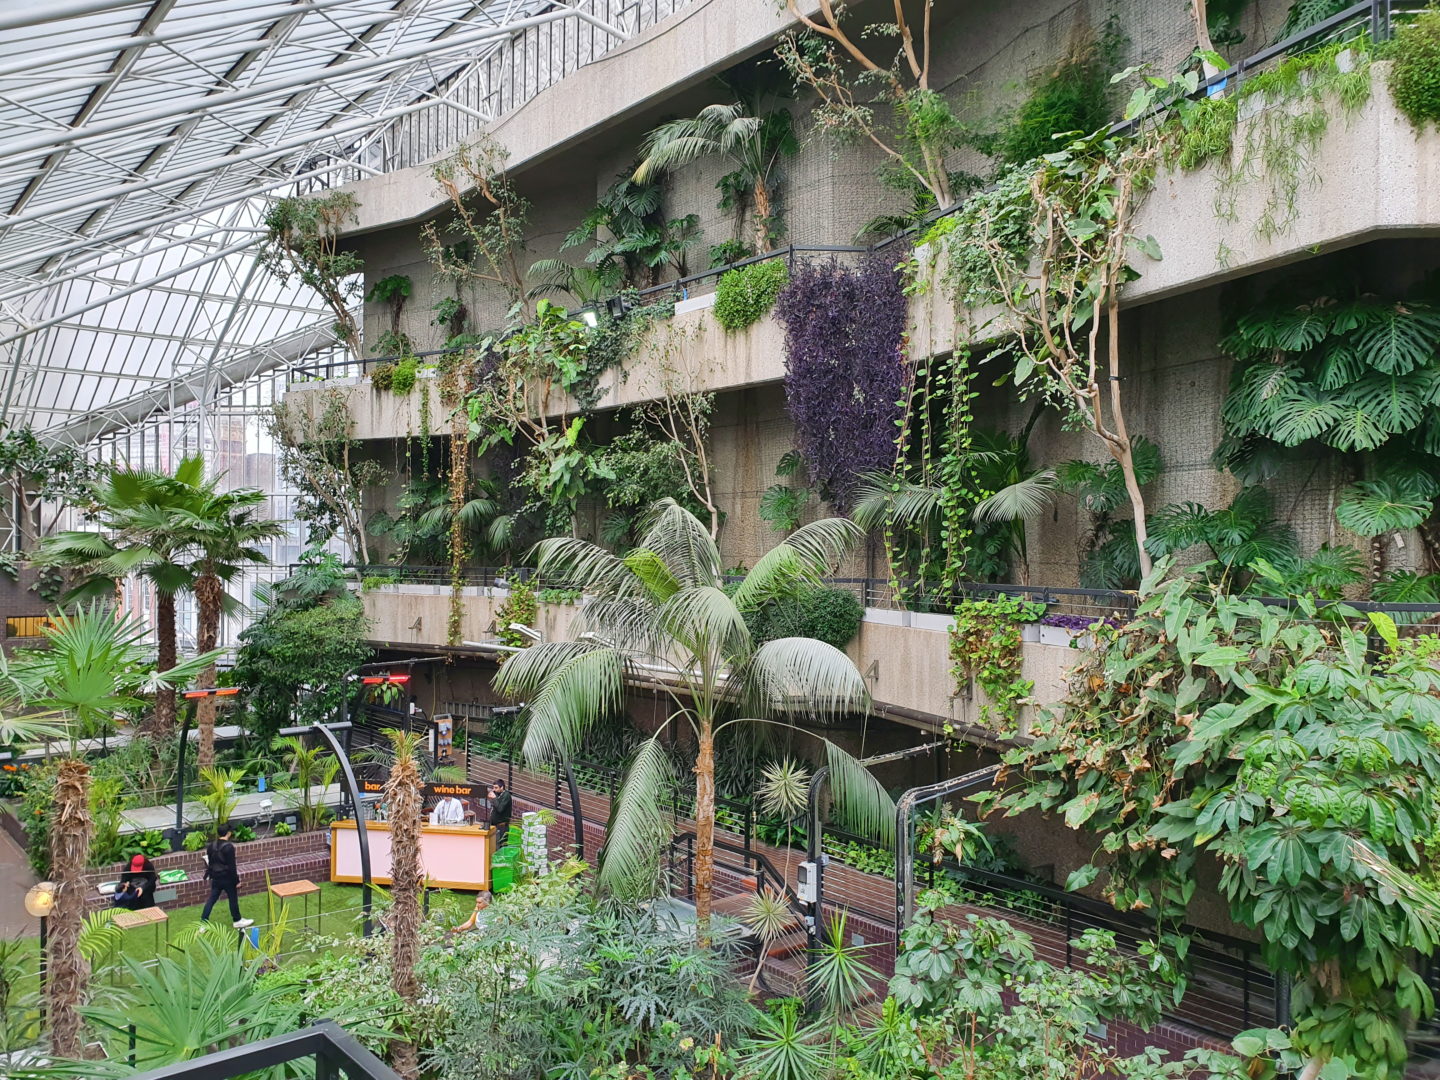 Taking a stroll through Barbican Conservatory - interior